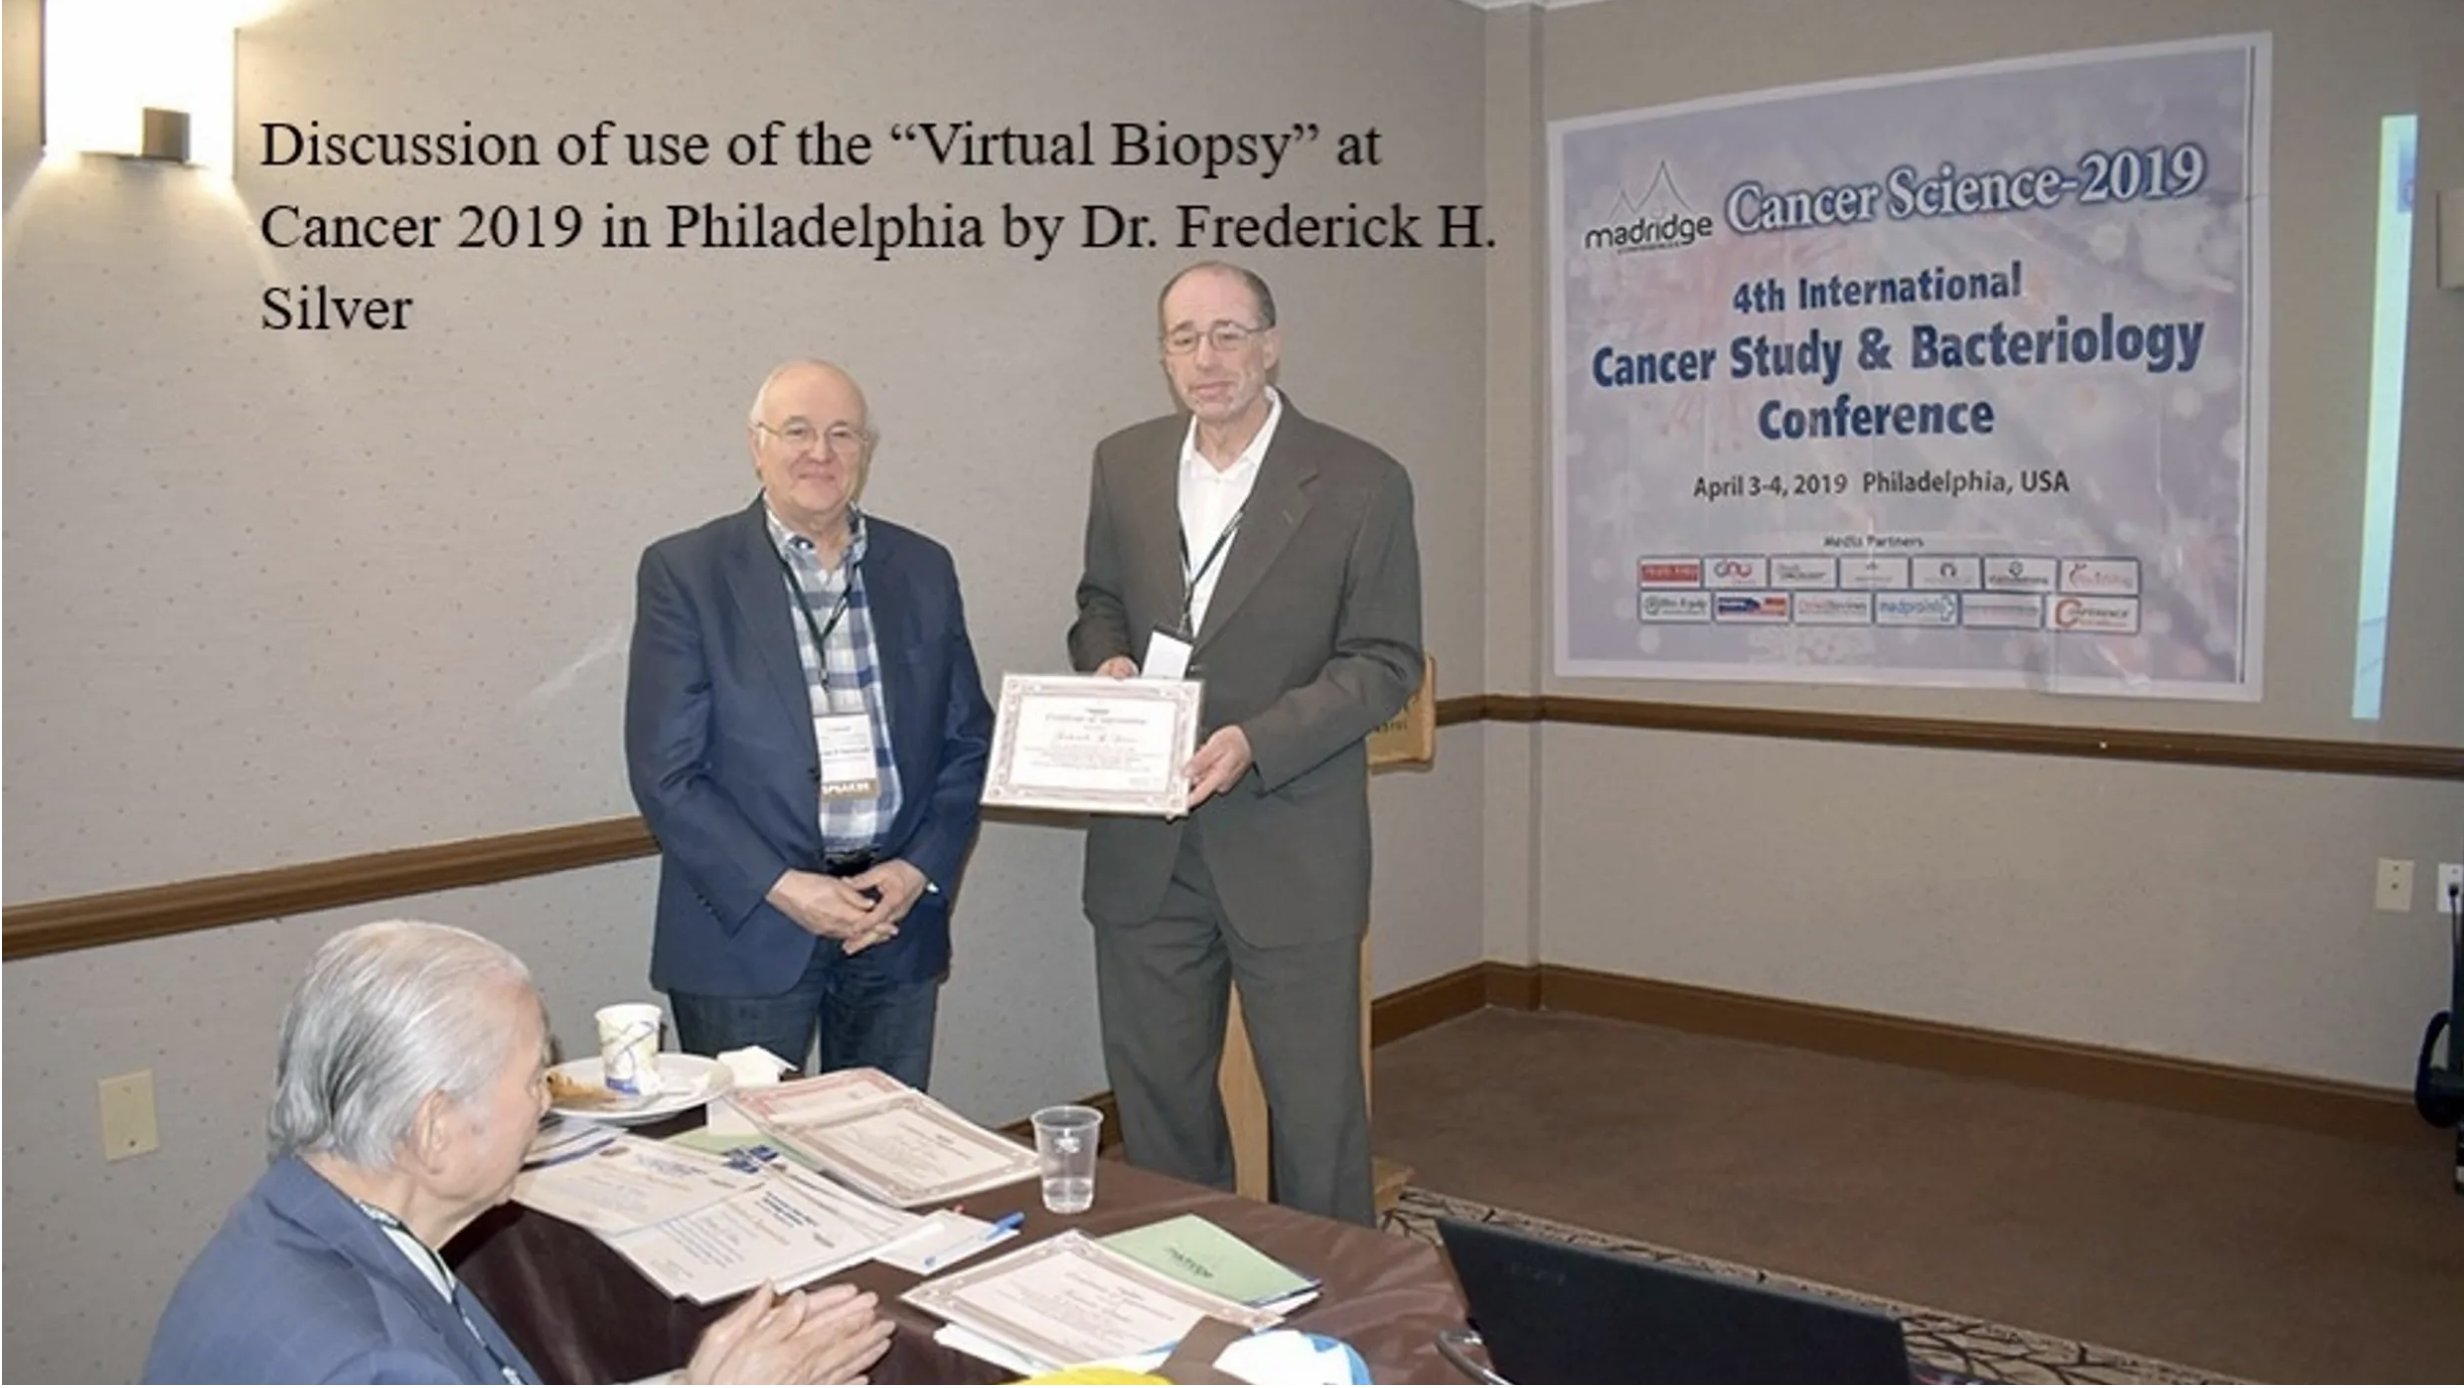 DISCUSSION OF THE USE OF “VIRTUAL BIOPSY” AT CANCER 2019!